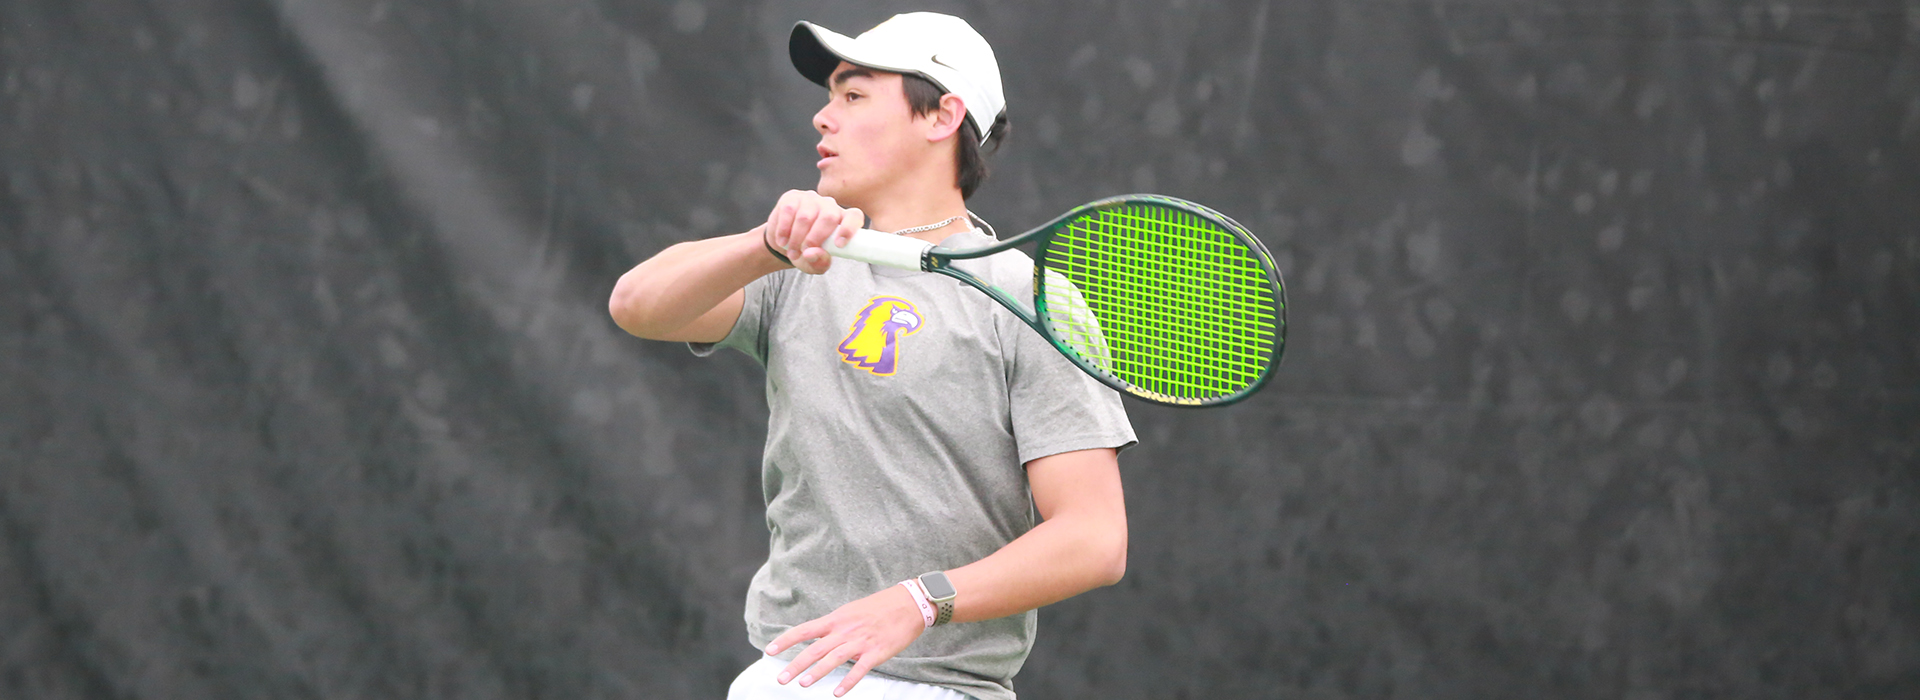 Tech tennis competes in Universal Tennis College Circuit at Belmont